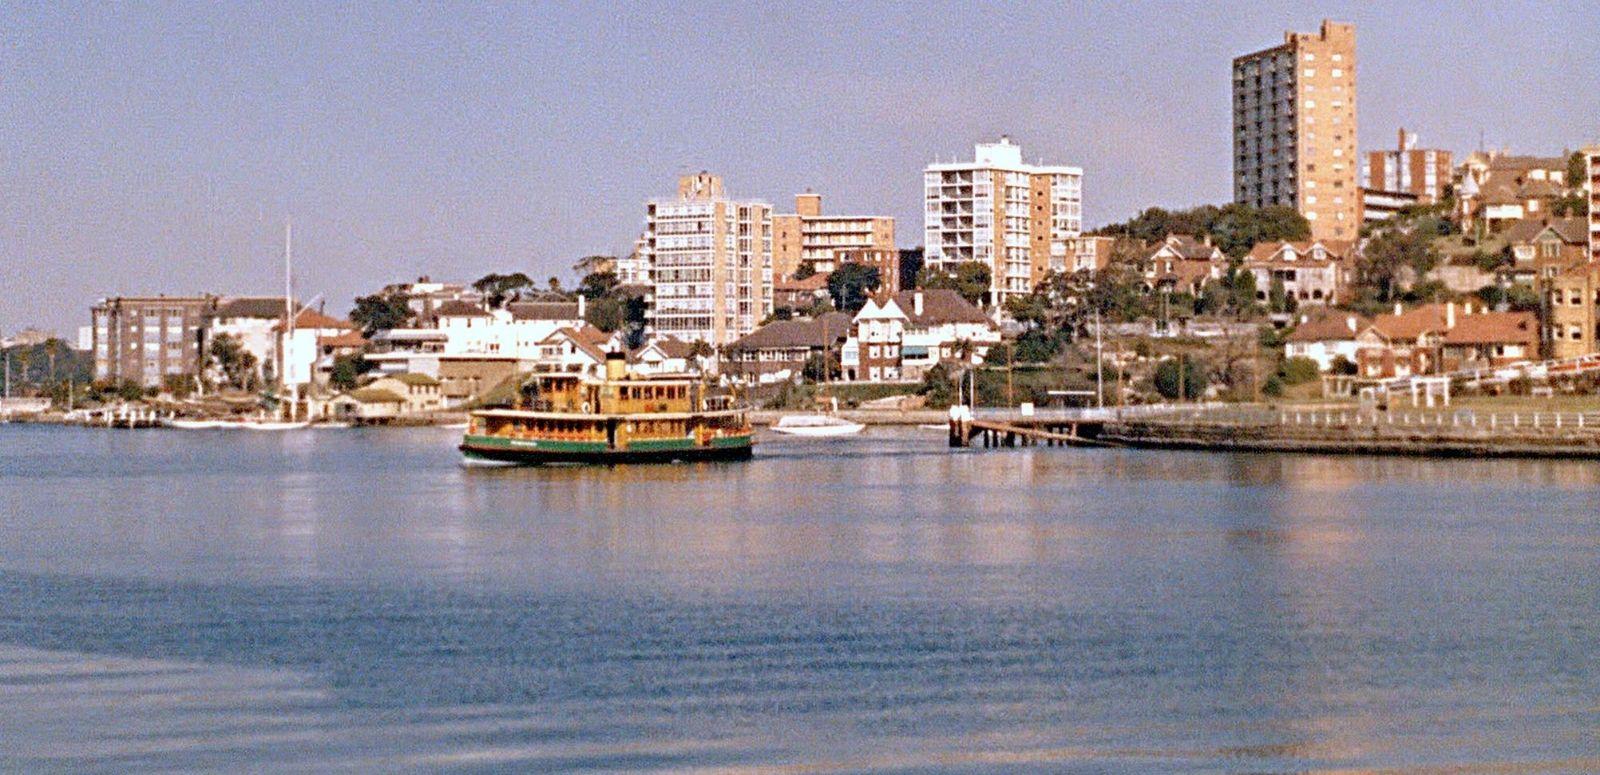 A ferry is crossing Sydney Harbour with the shore and houses and apartments behind it.